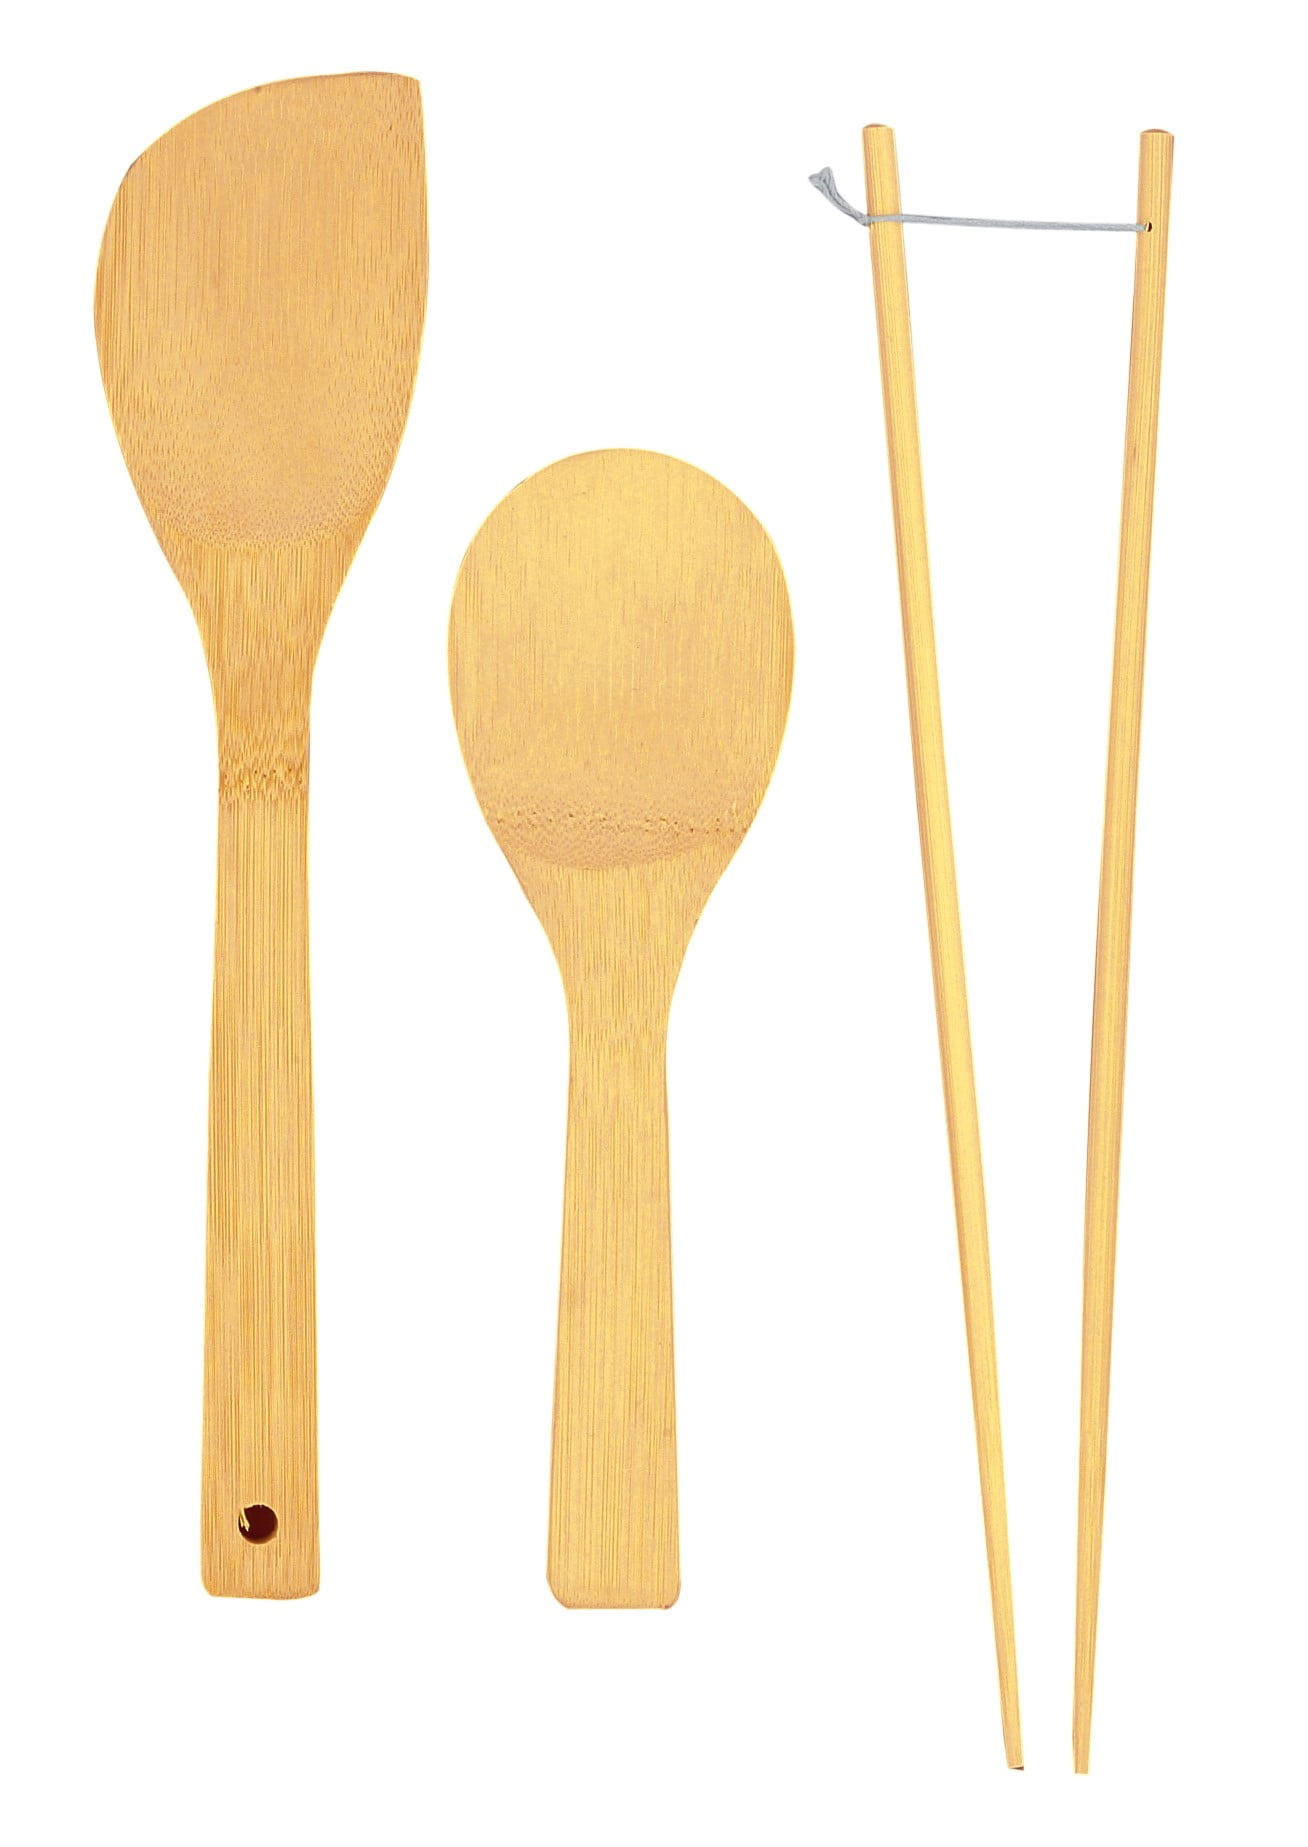 Helen Chen's Asian Kitchen Bamboo Kitchen Tools Cooking Utensils and Stir  Fry Set, 3-Piece 